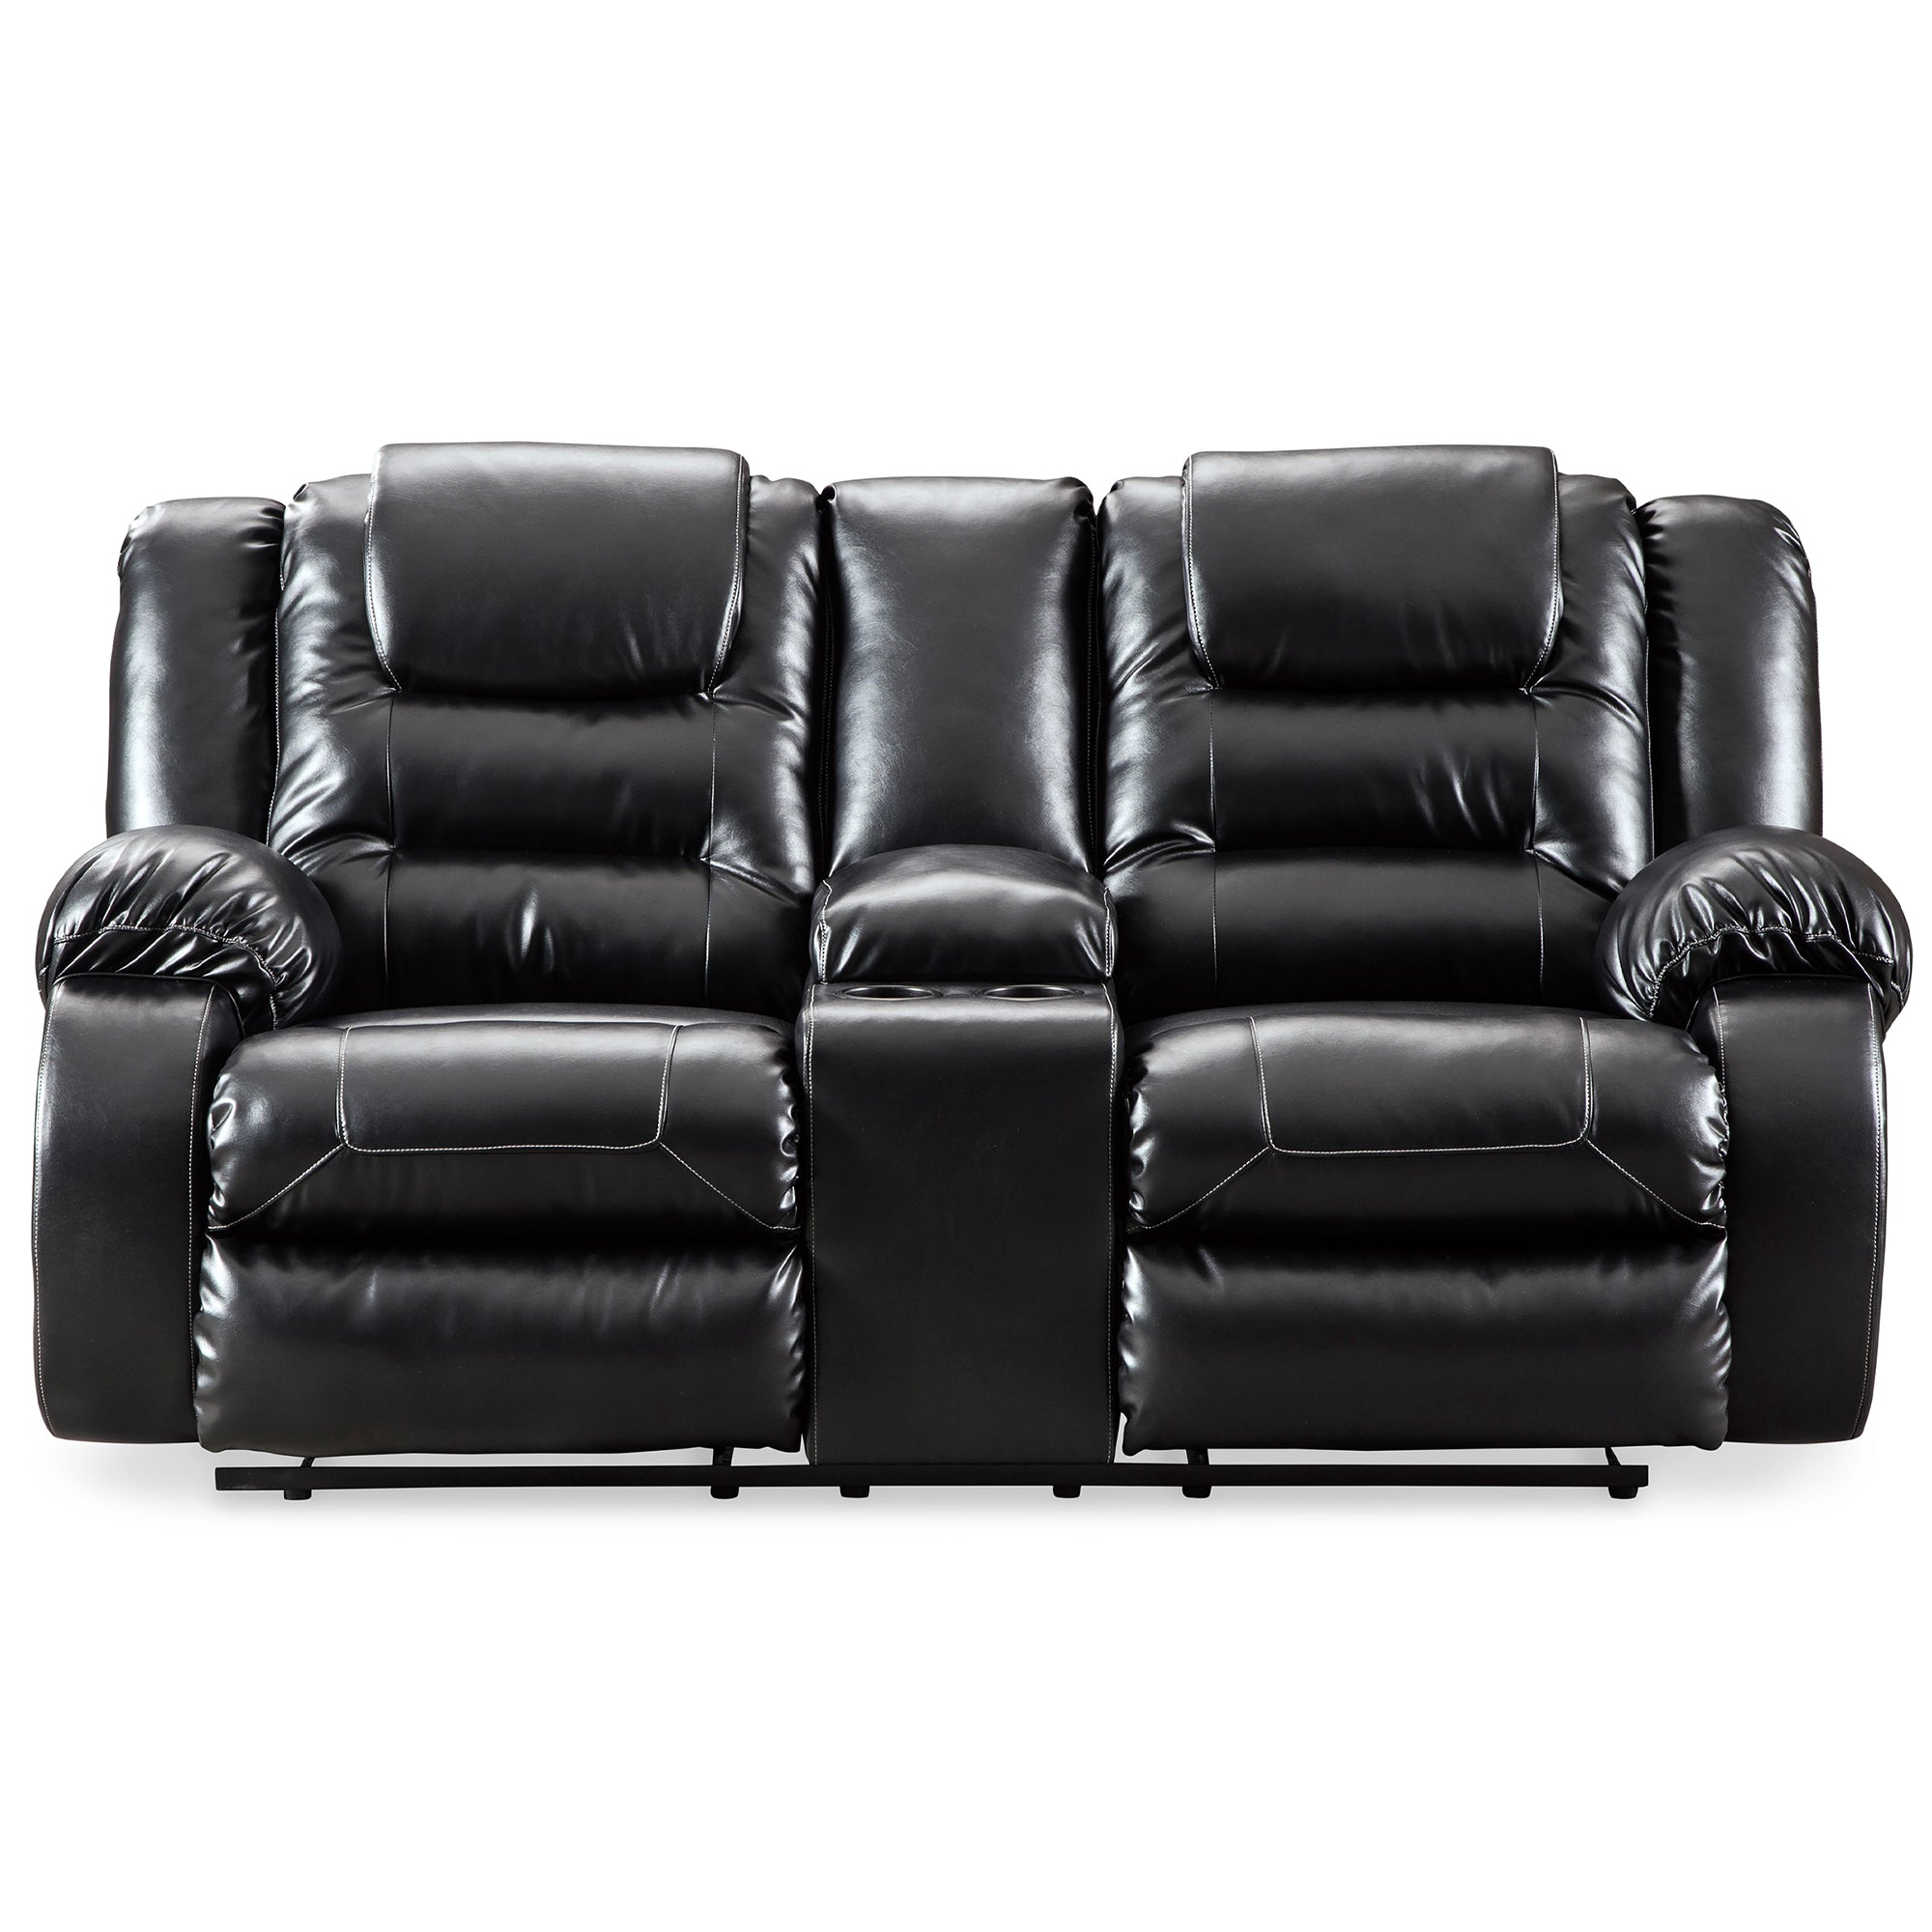 Vacherie Reclining Loveseat with Console in Black